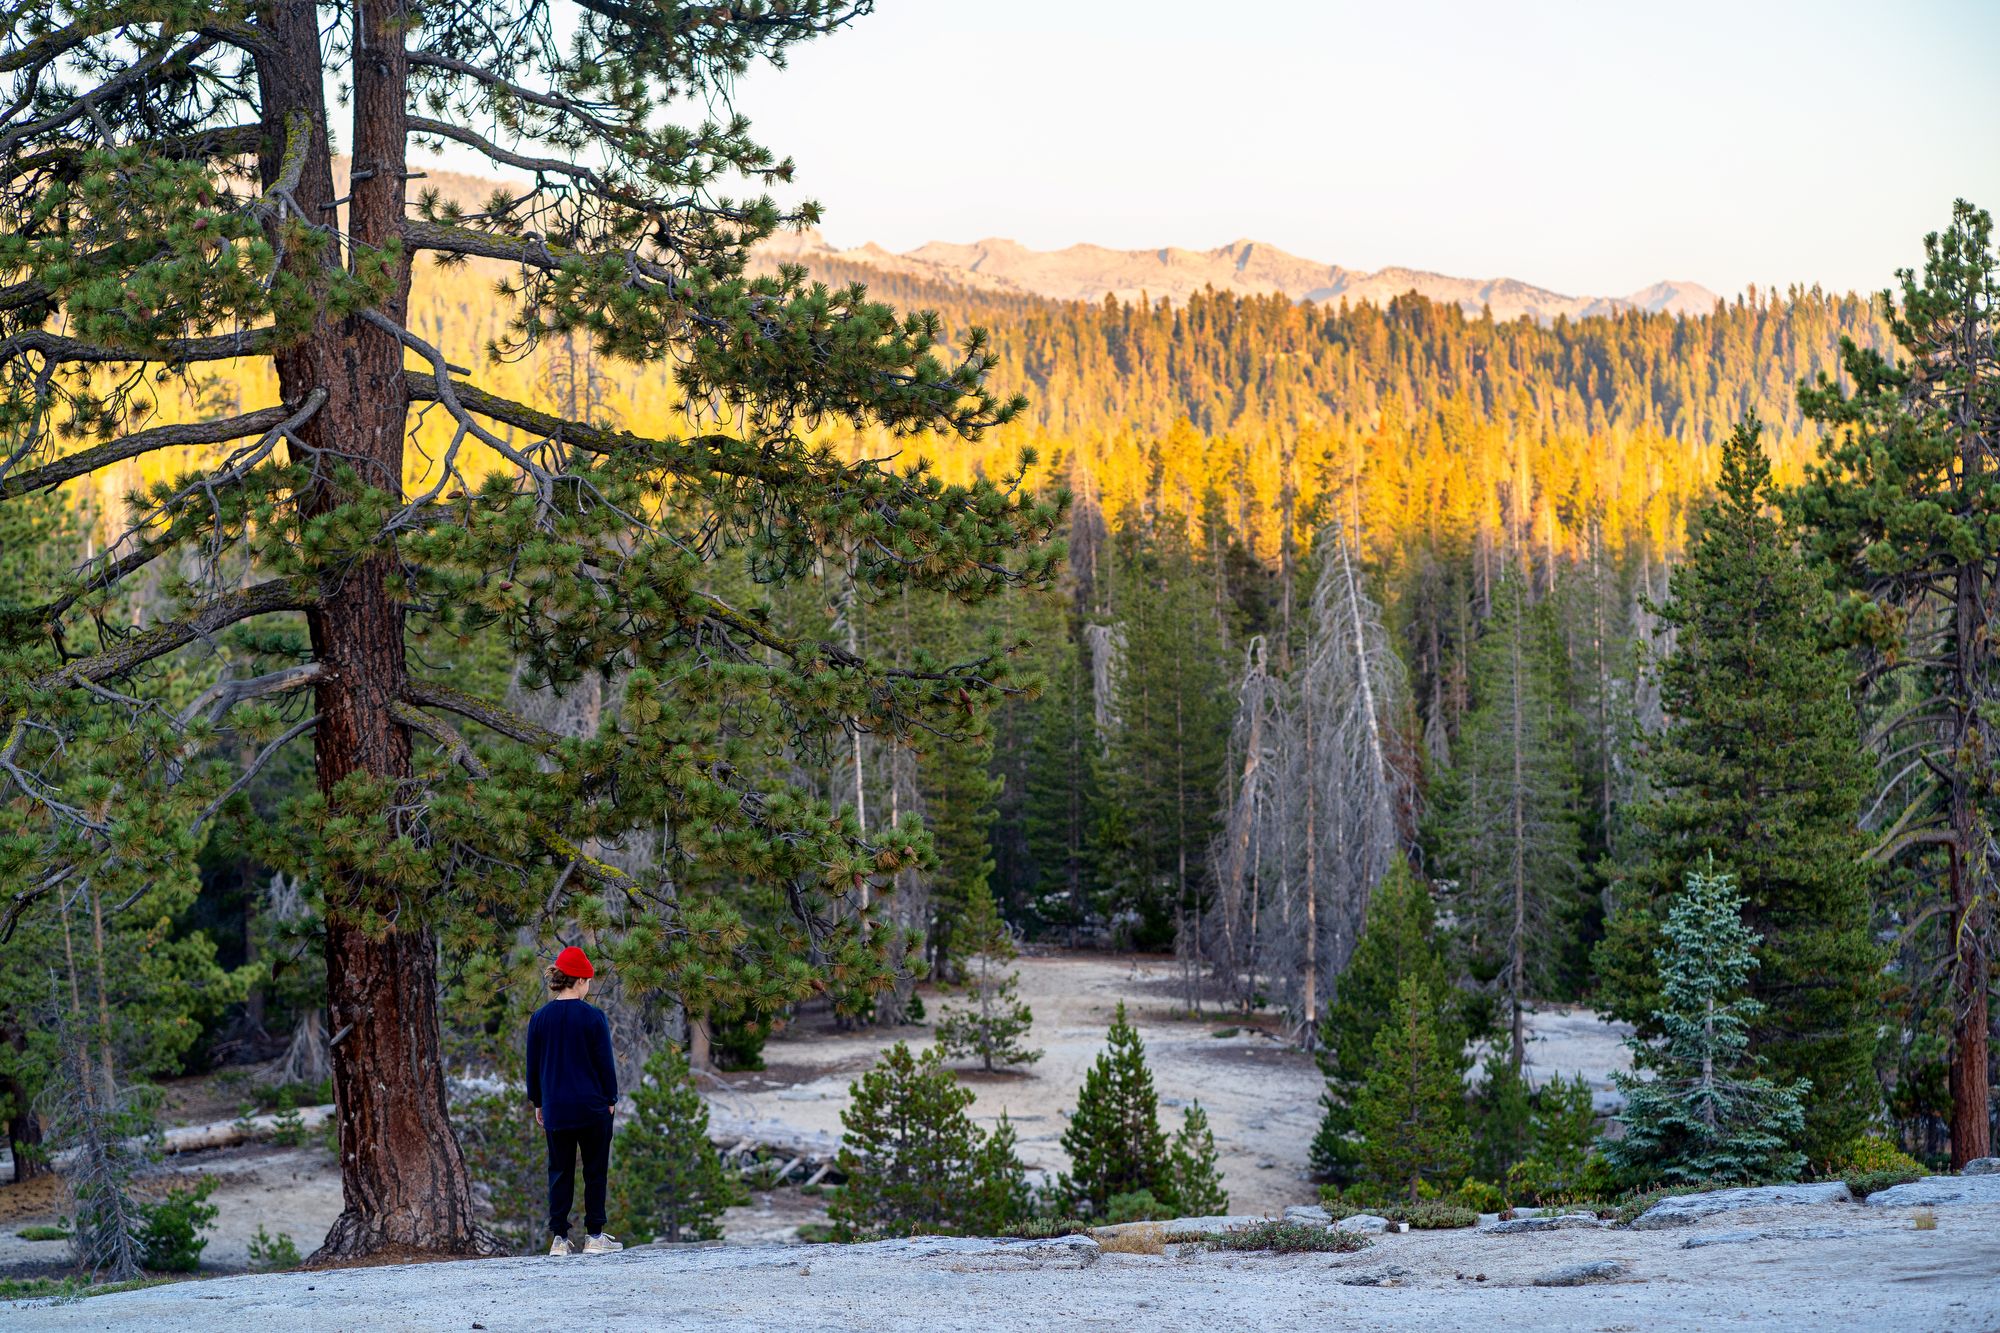 The views from Big Meadow campground in Sequoia National Forest are breathtaking.